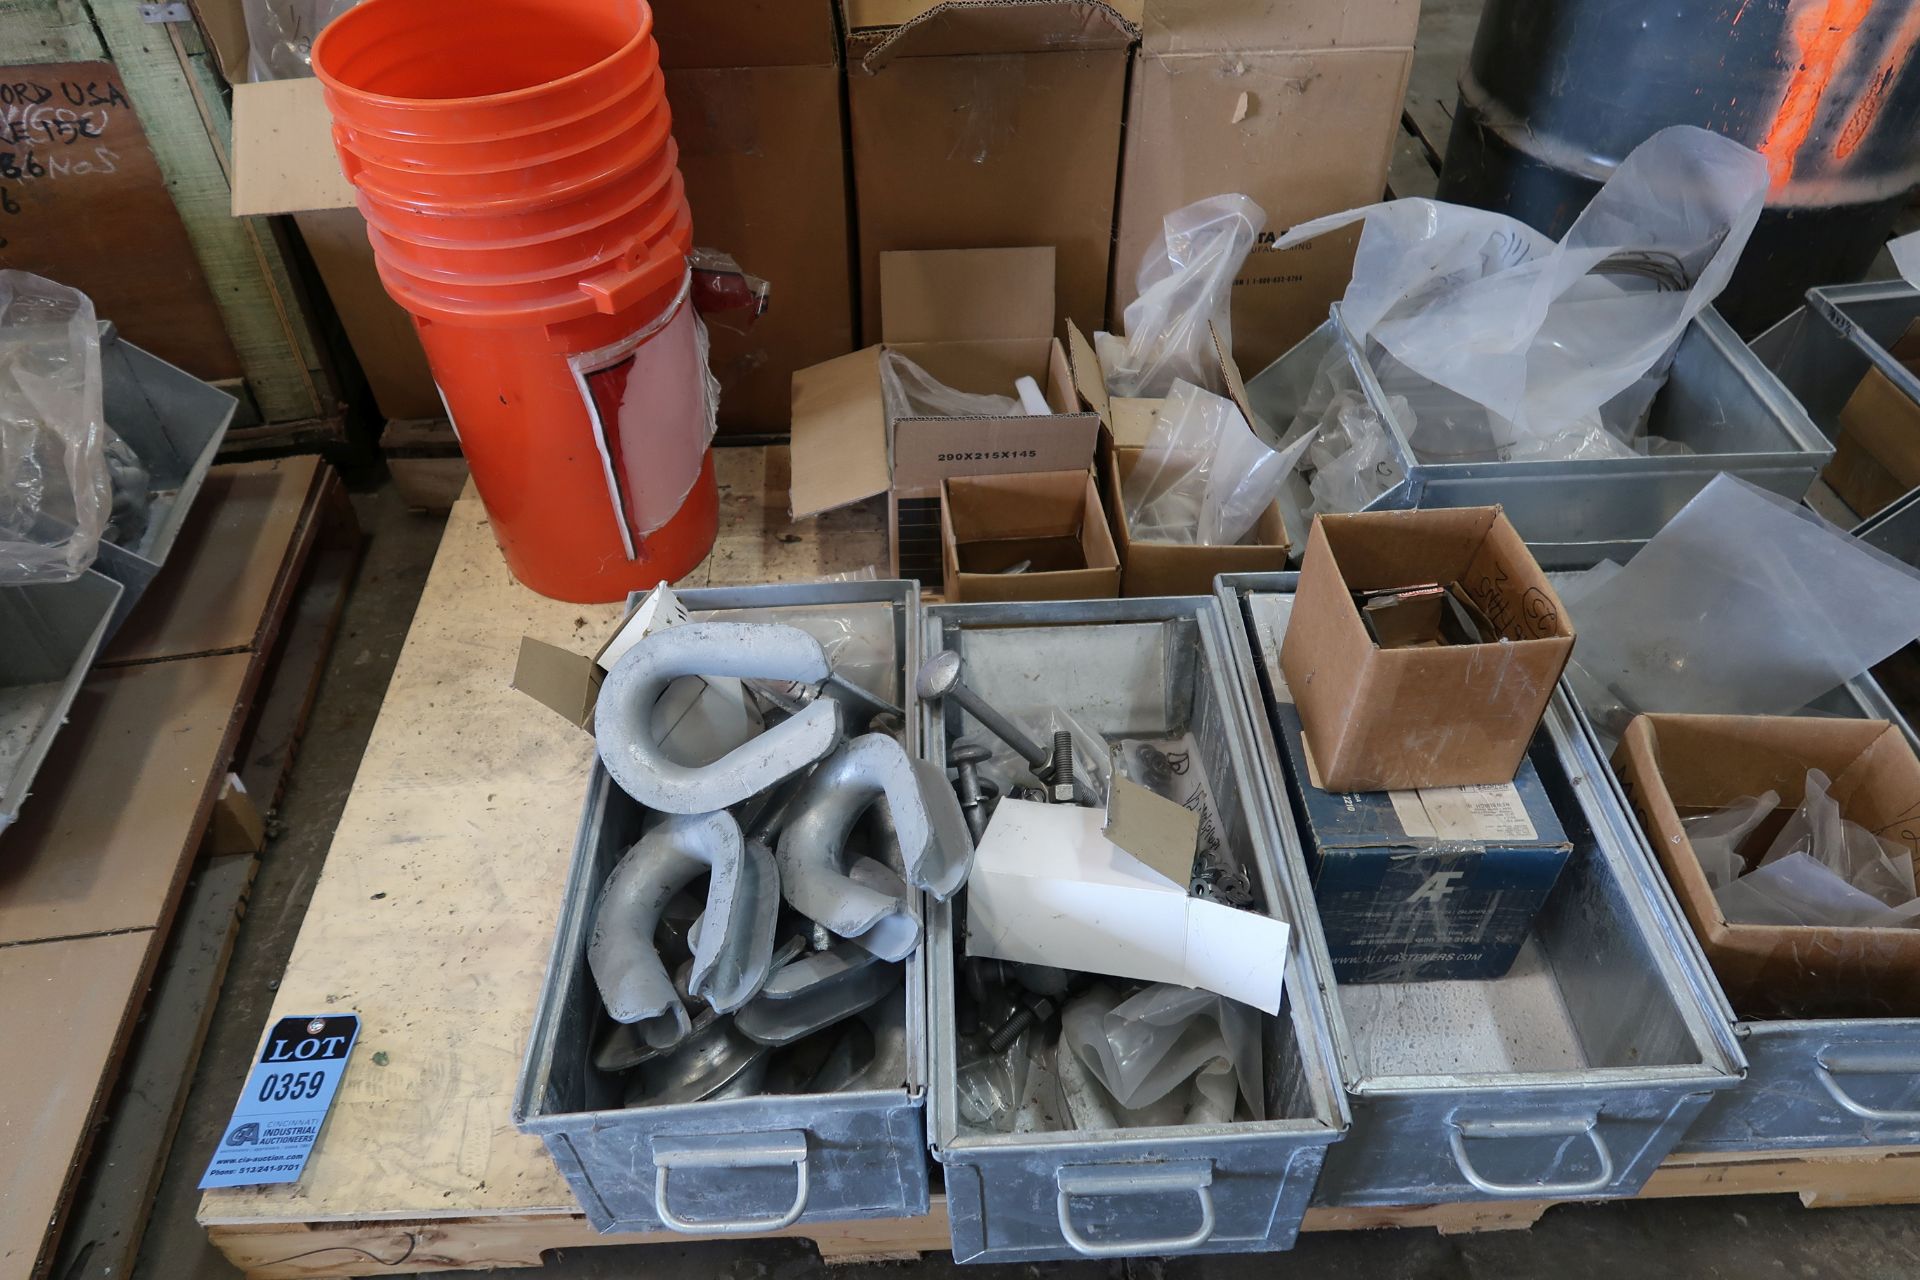 SKID MISCELLANEOUS GALVANIZED TOWER COMPONENTS AND HARDWARE - Image 2 of 5